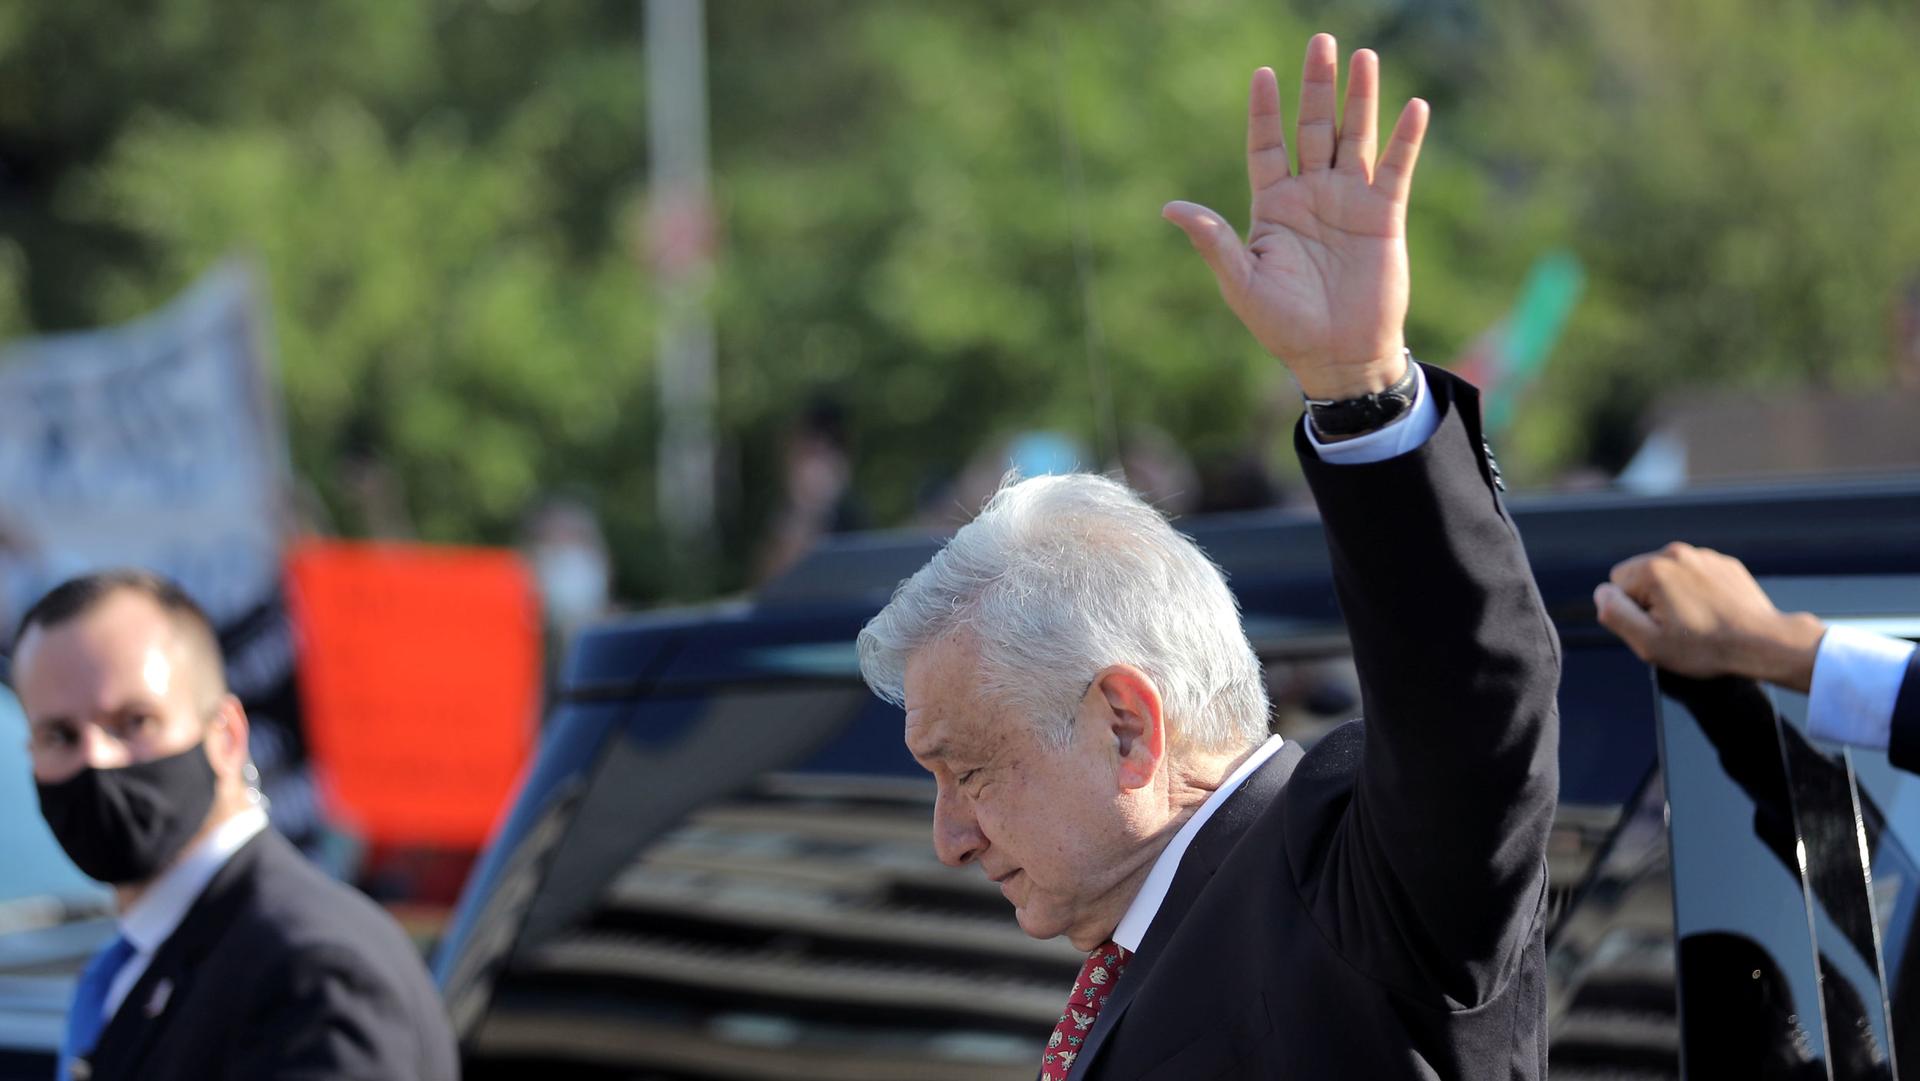 Mexico's President Andrés Manuel López Obrador is shown from the side wearing a dark suit and waving his left hand in the air.